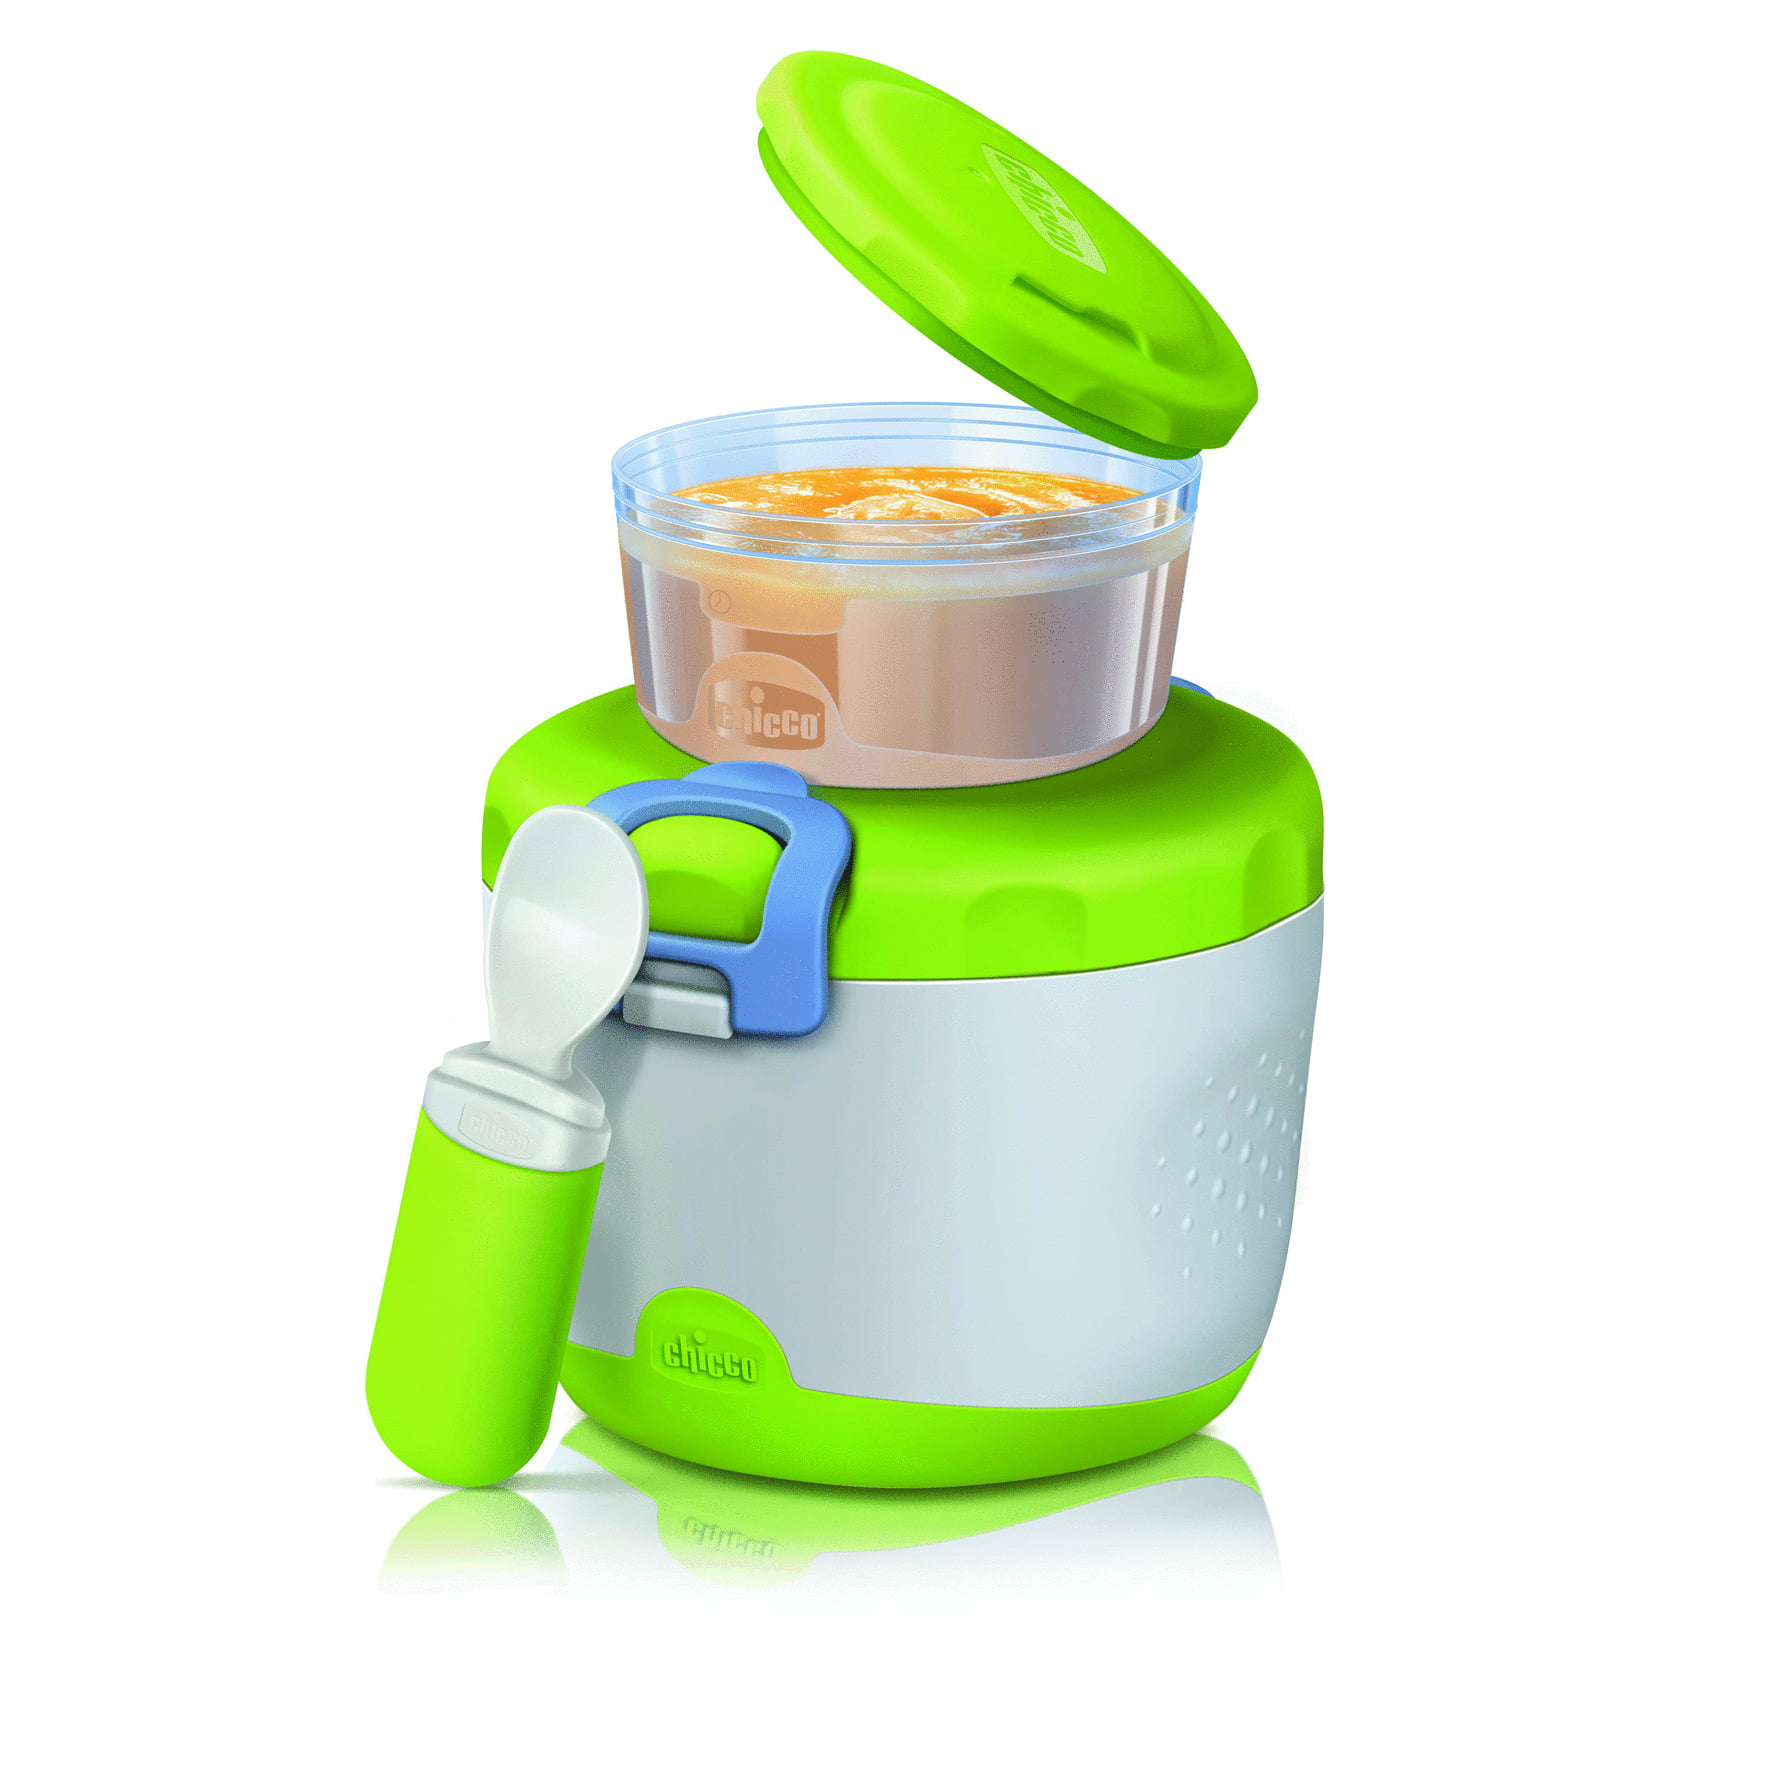 chicco Easy Meal Insulating Container for Baby Food System 6m+